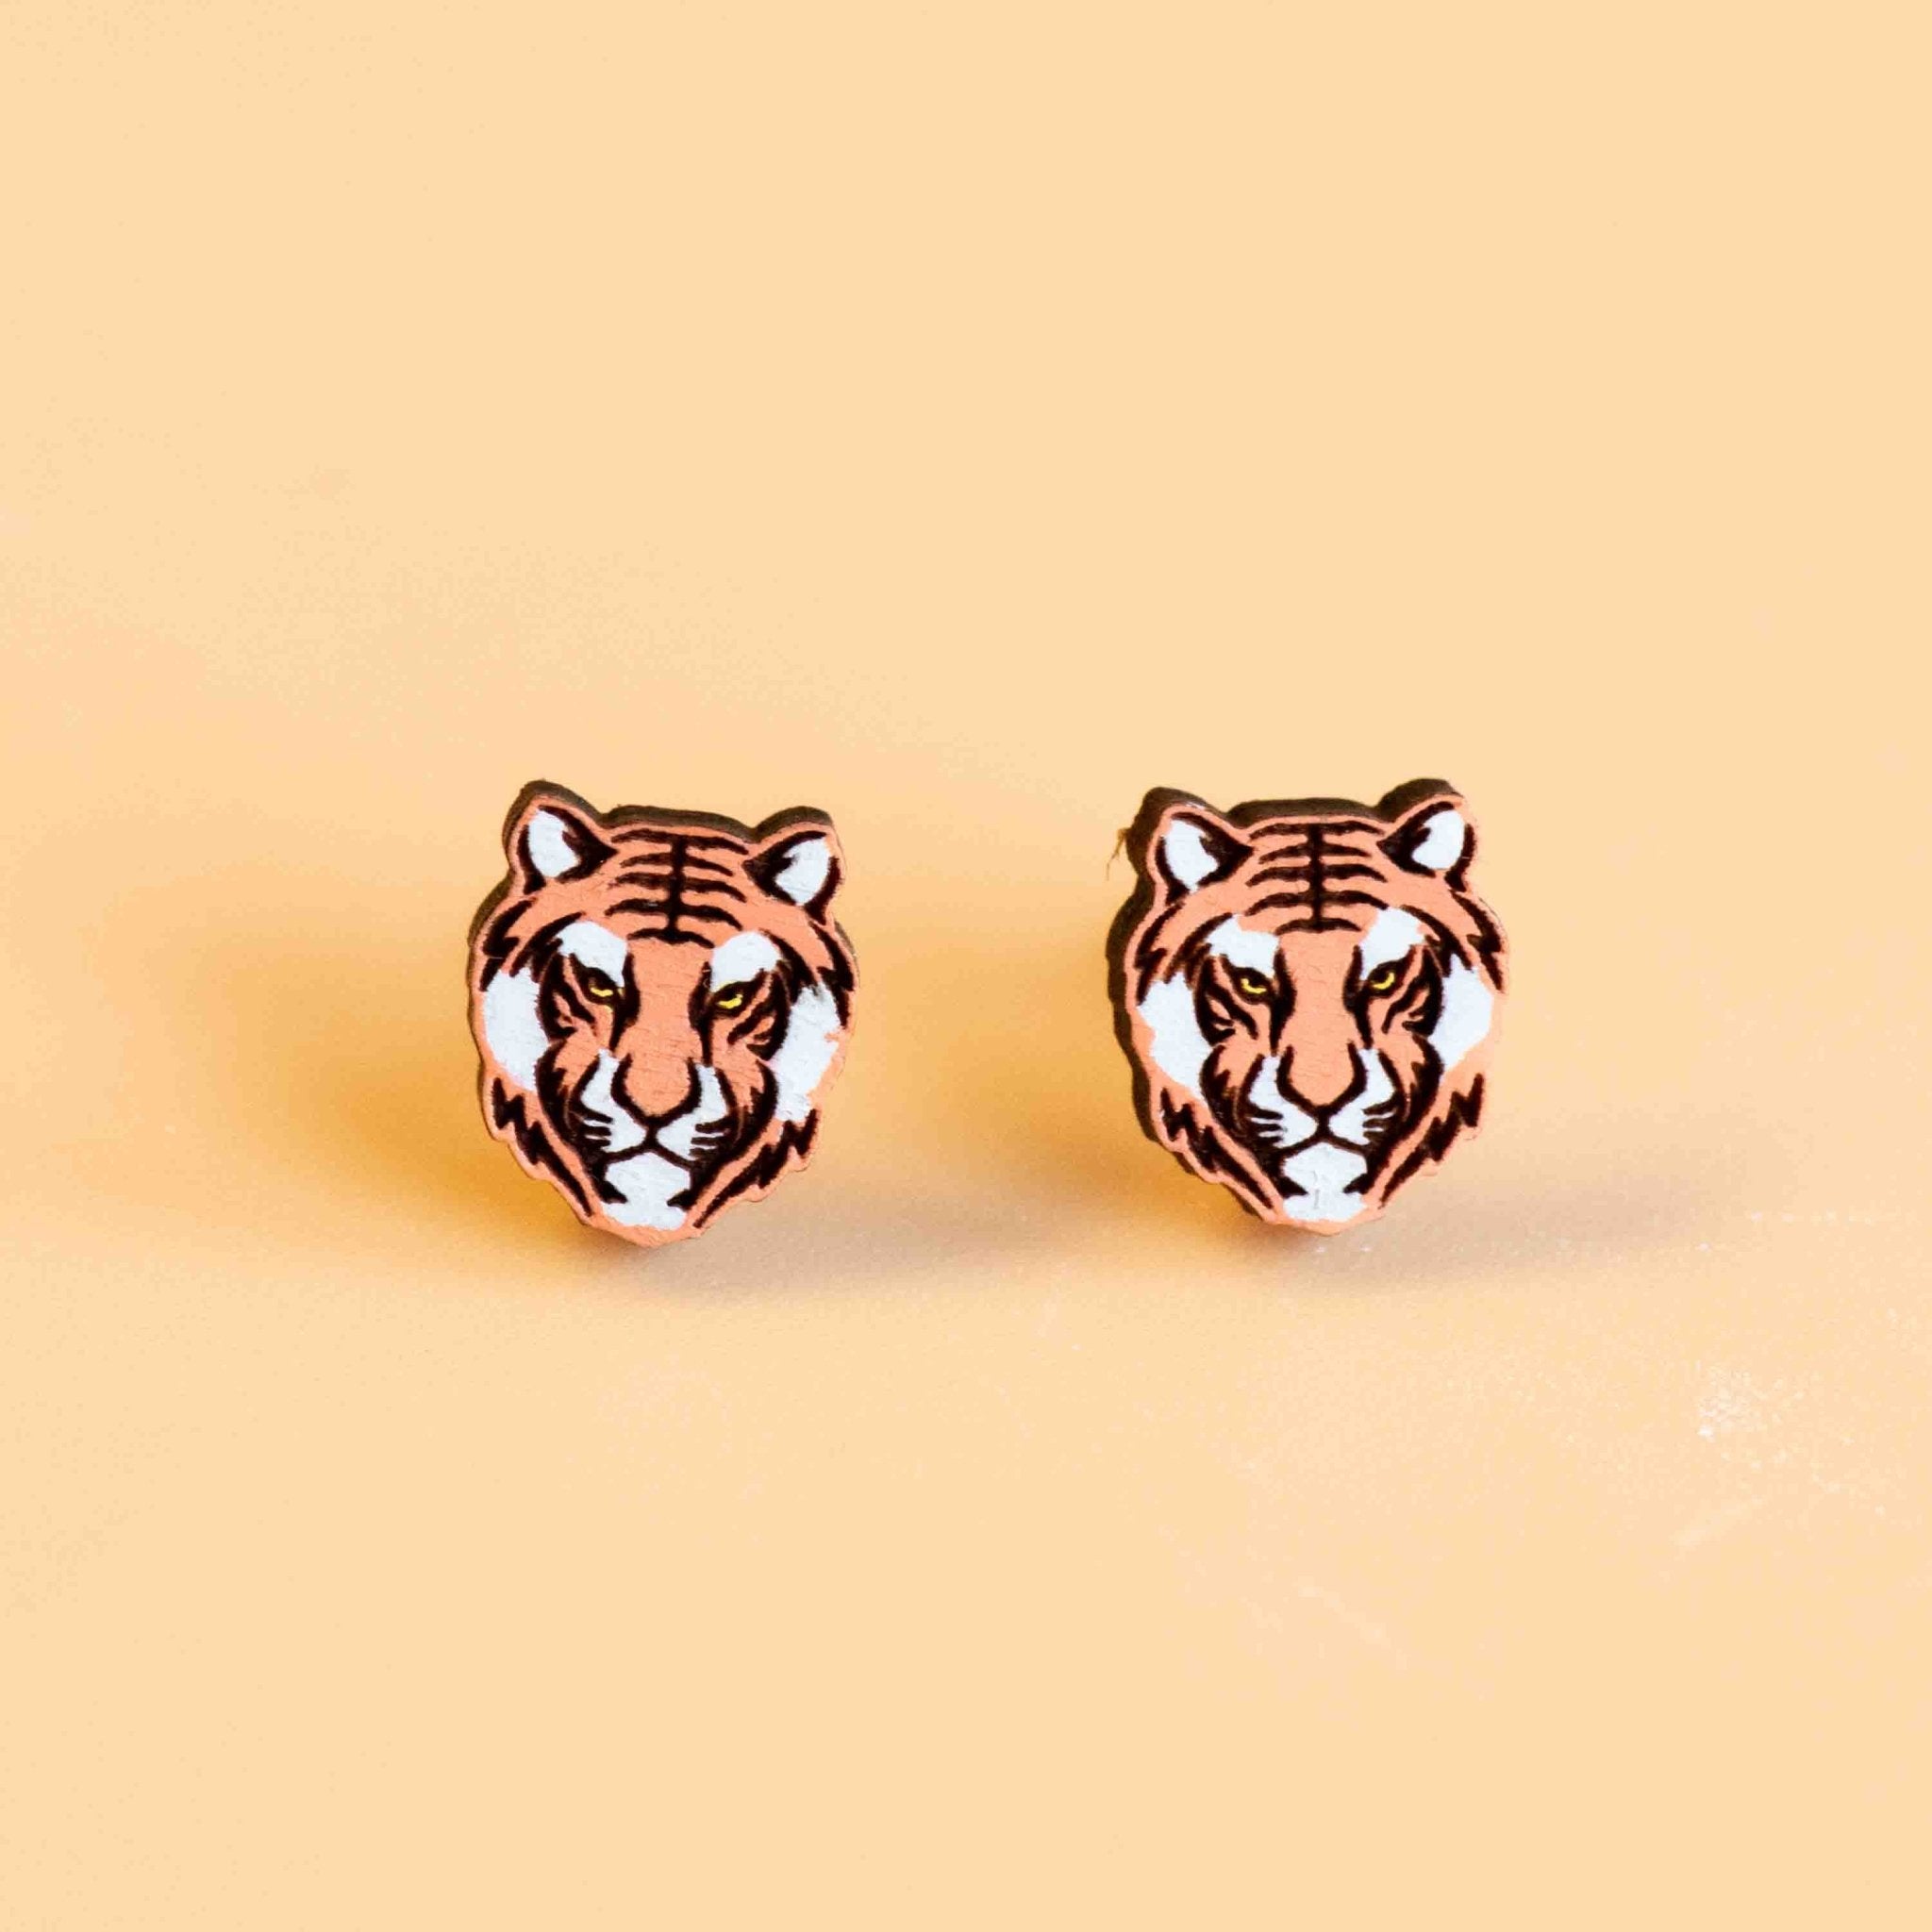 Hand-painted Tiger Earrings Wooden Jewellery - PEL10211 - Robin Valley Official Store